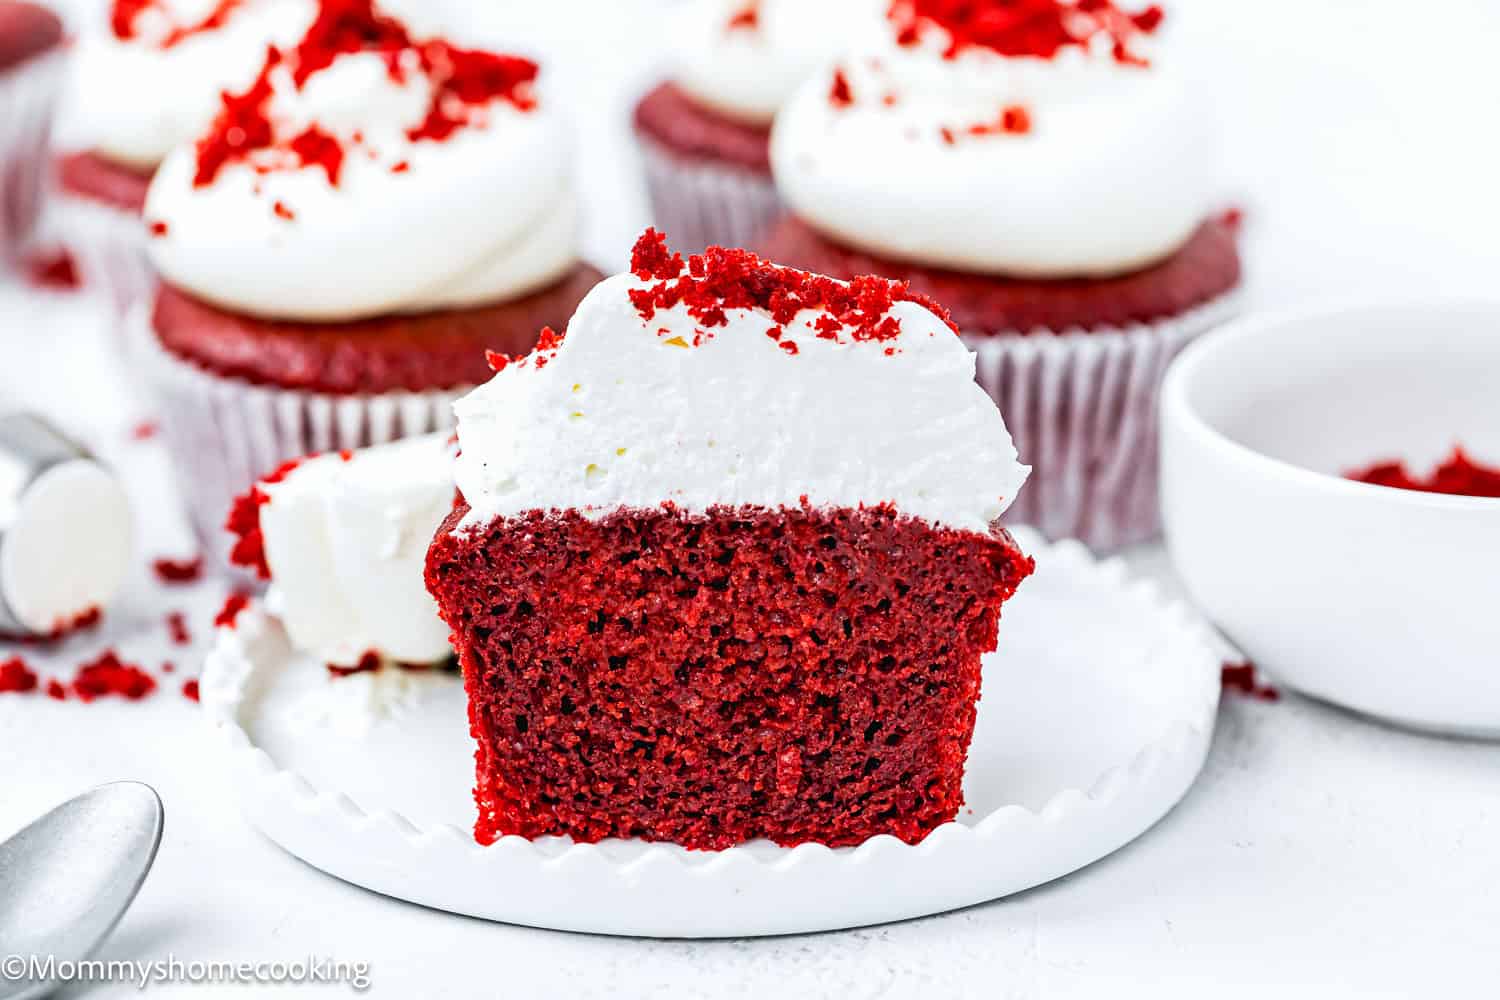 Vegan Red Velvet Cupcake cut in half showing its perfect fluffy texture.